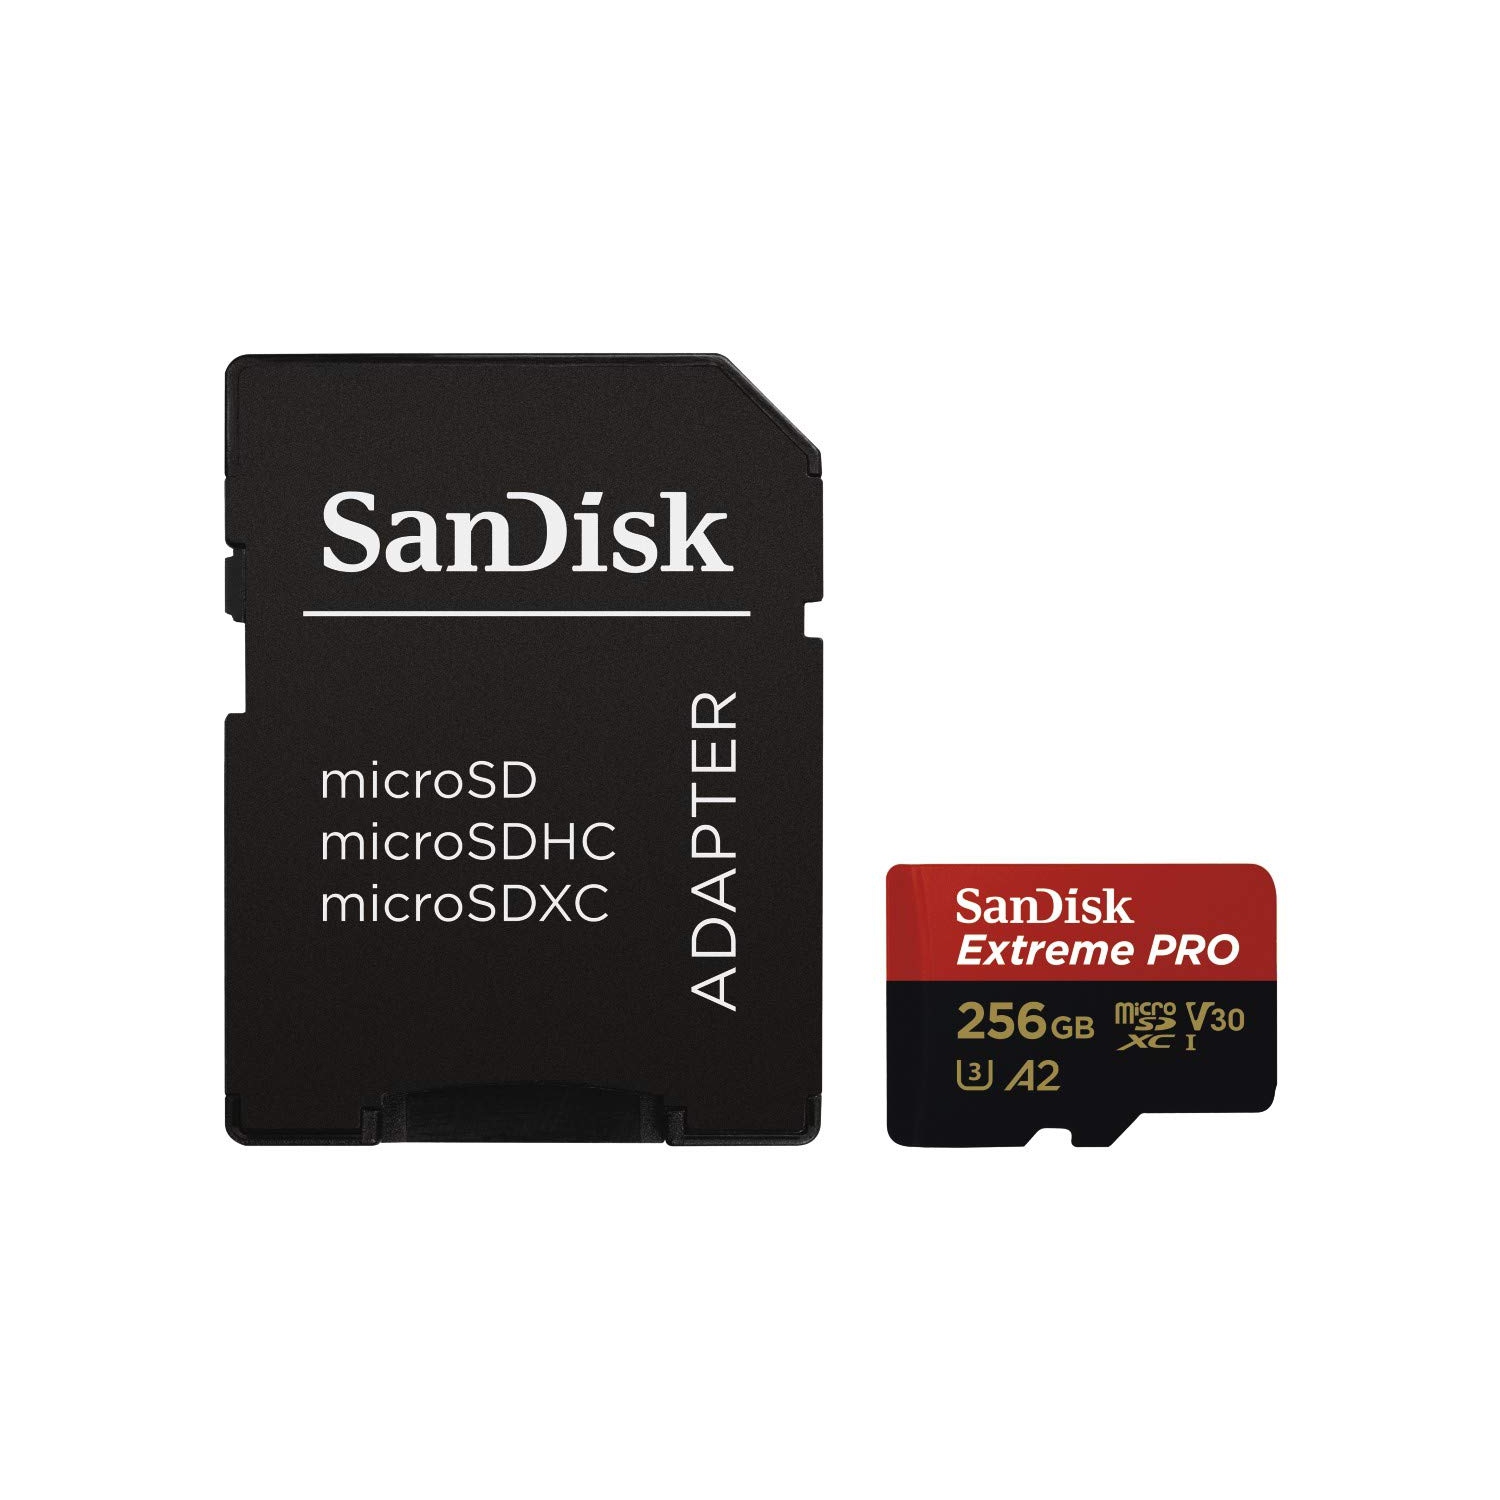 SanDisk Extreme PRO 256GB Micro SD Card with Adapter SDSQXCZ-256G